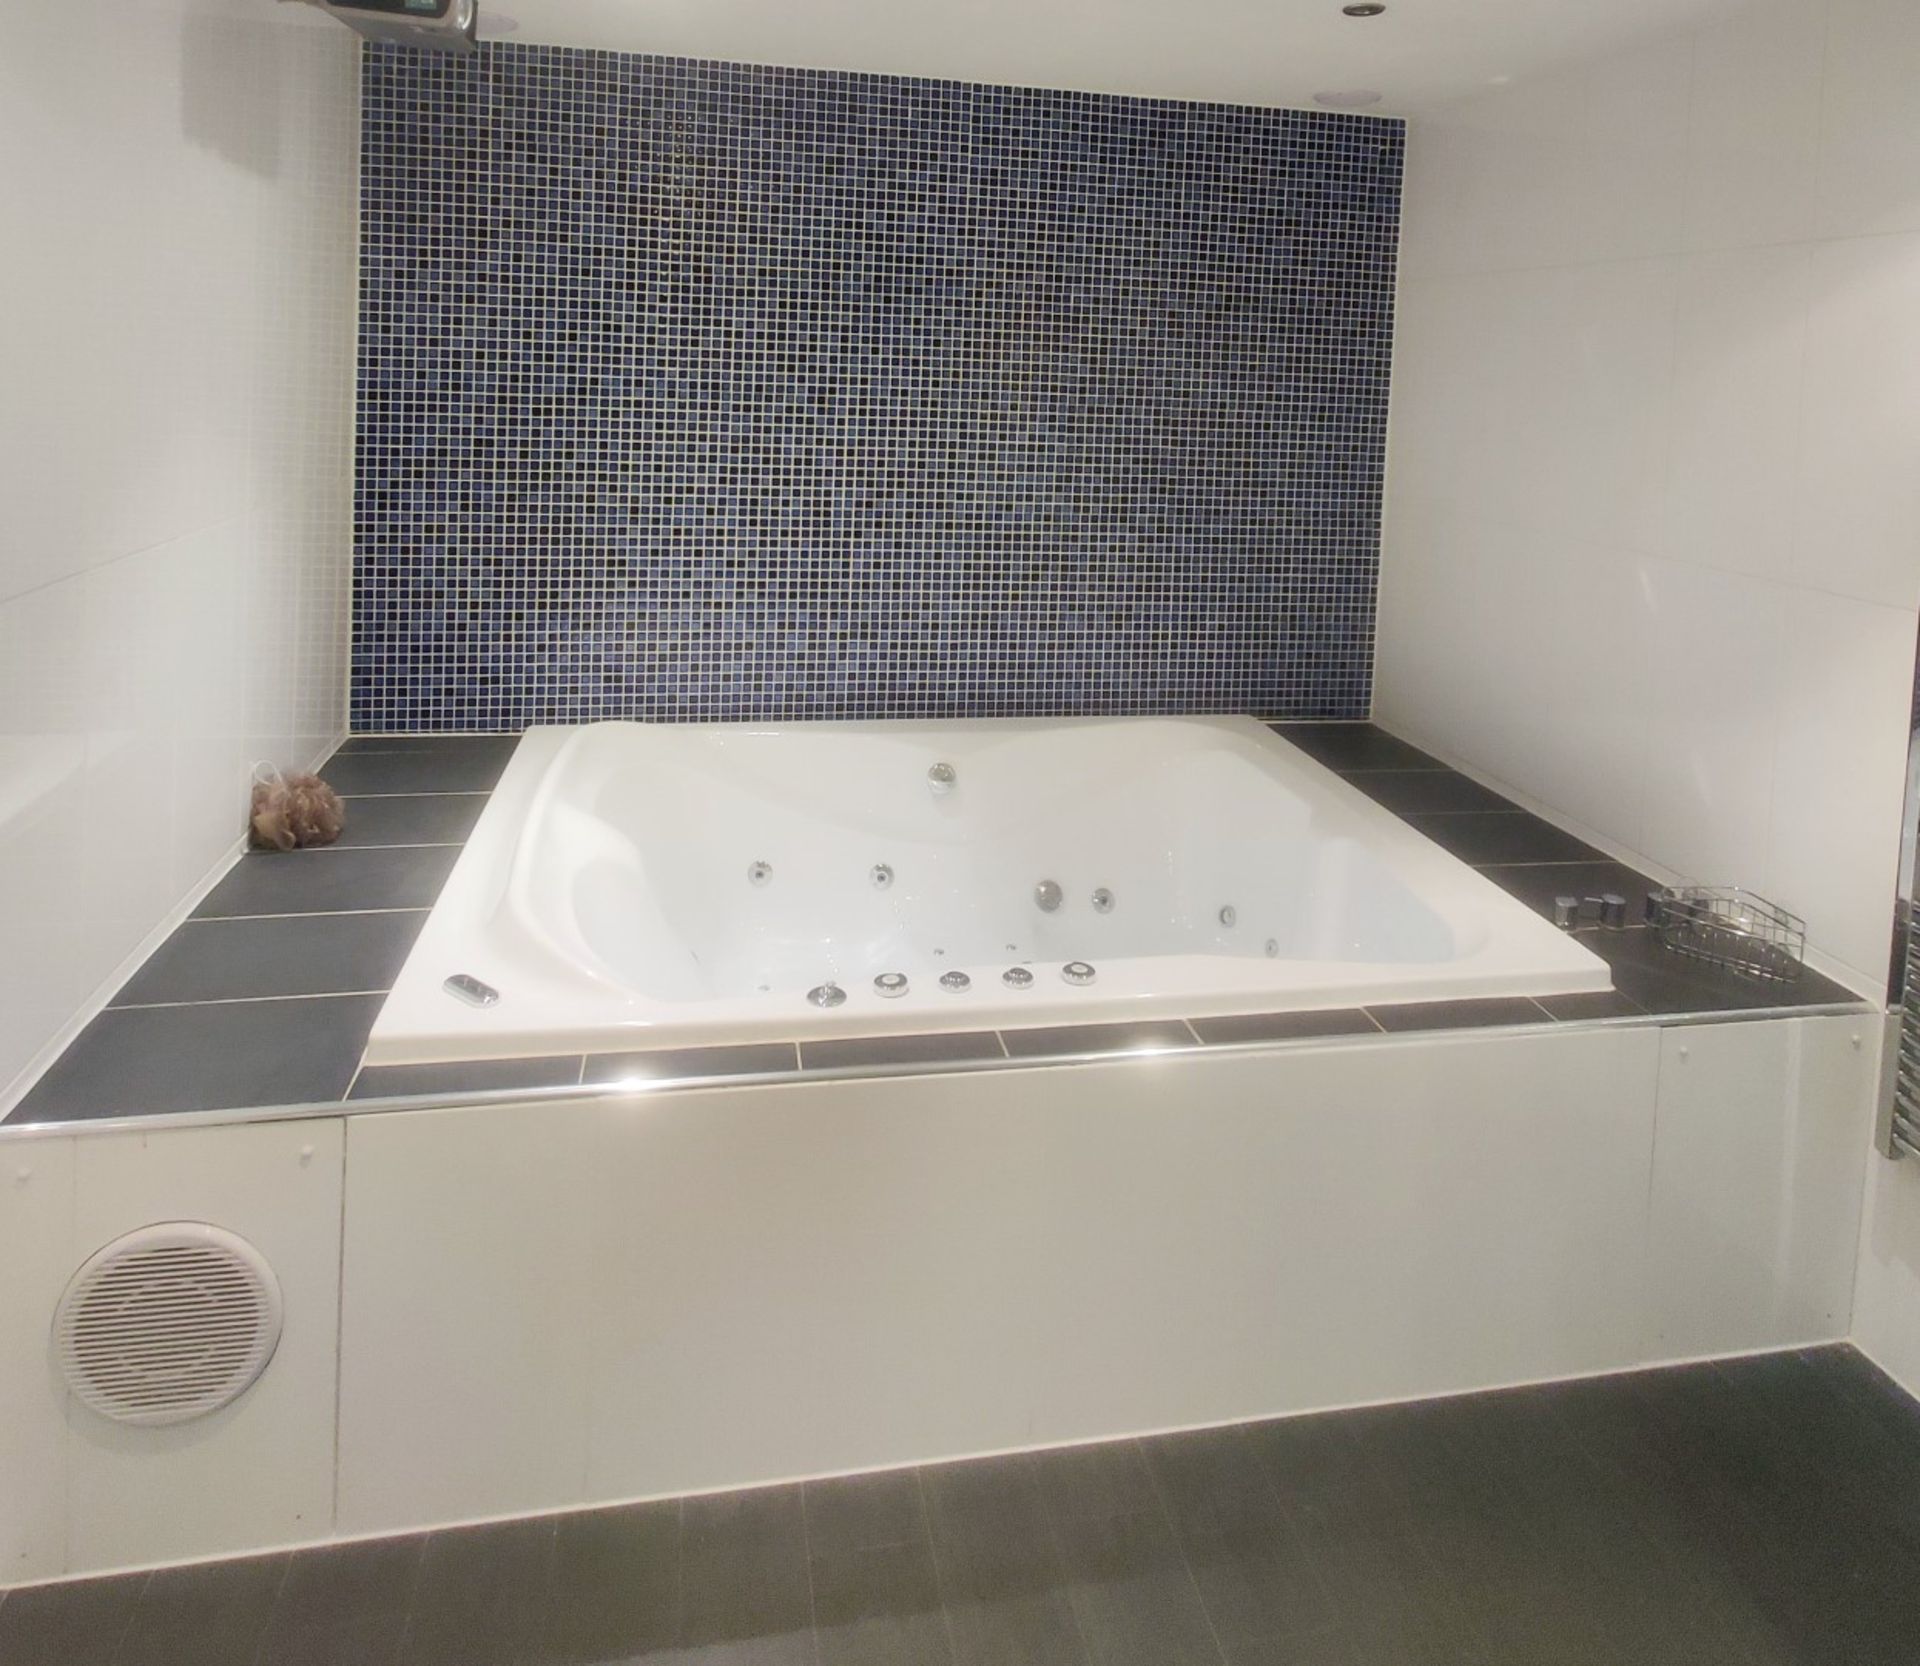 1 x Bronte Jacuzzi Whirlpool Bath - Approx 6.5ft x 5ft Size - Includes Brassware, Water Jets & Pump - Image 2 of 15